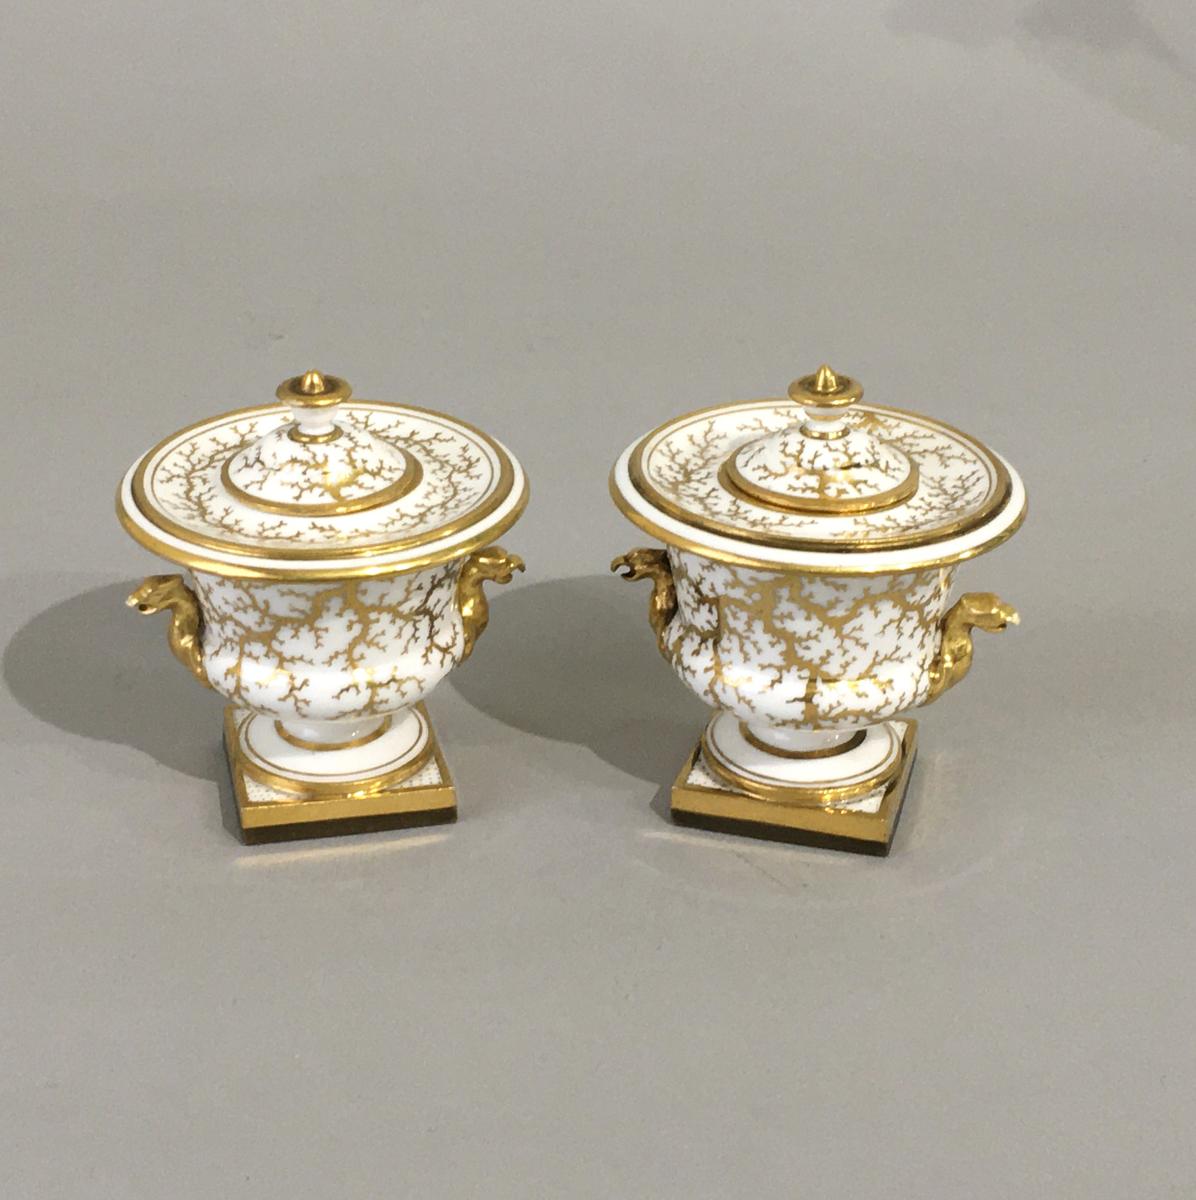 A Fine Pair of Flight Barr & Barr Worcester Porcelain Miniature Vases / Inkwells & Covers, Circa 1820.